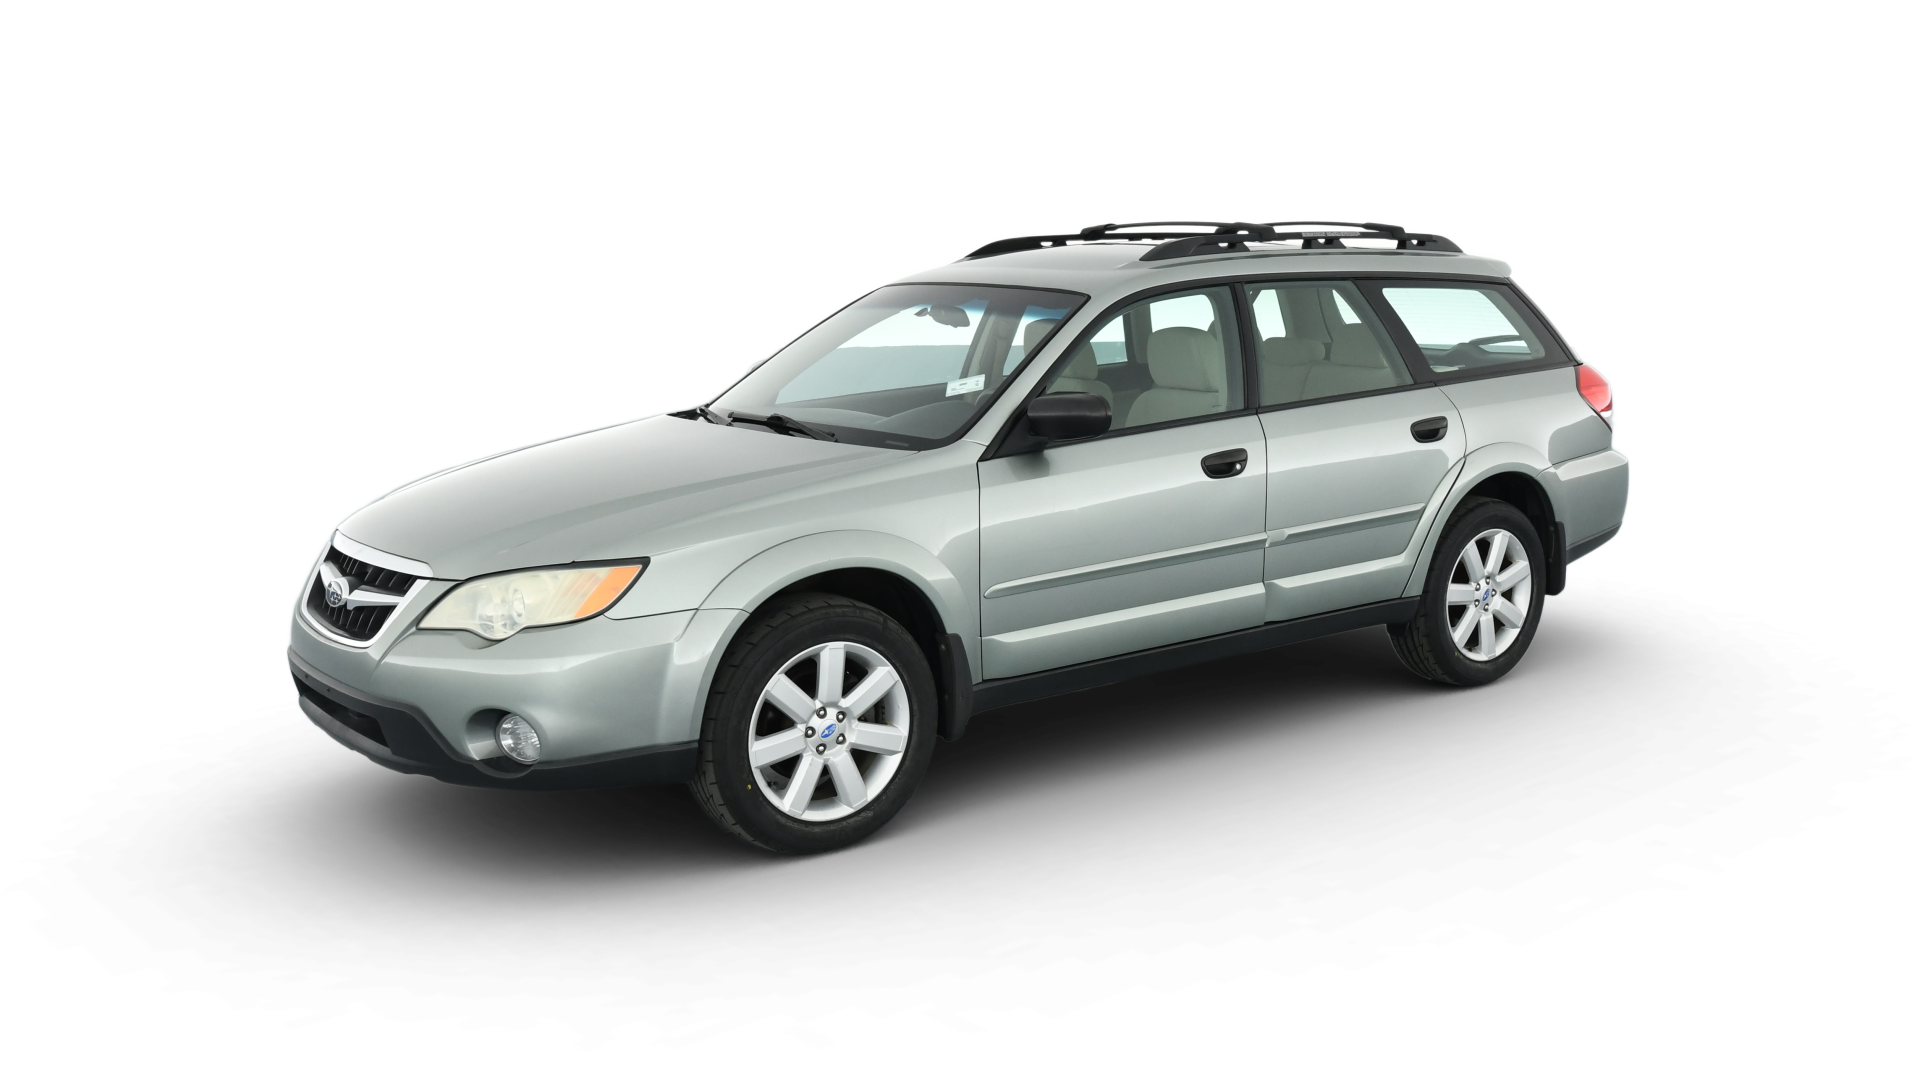 Used 2009 Subaru Outback For Sale Online | Carvana